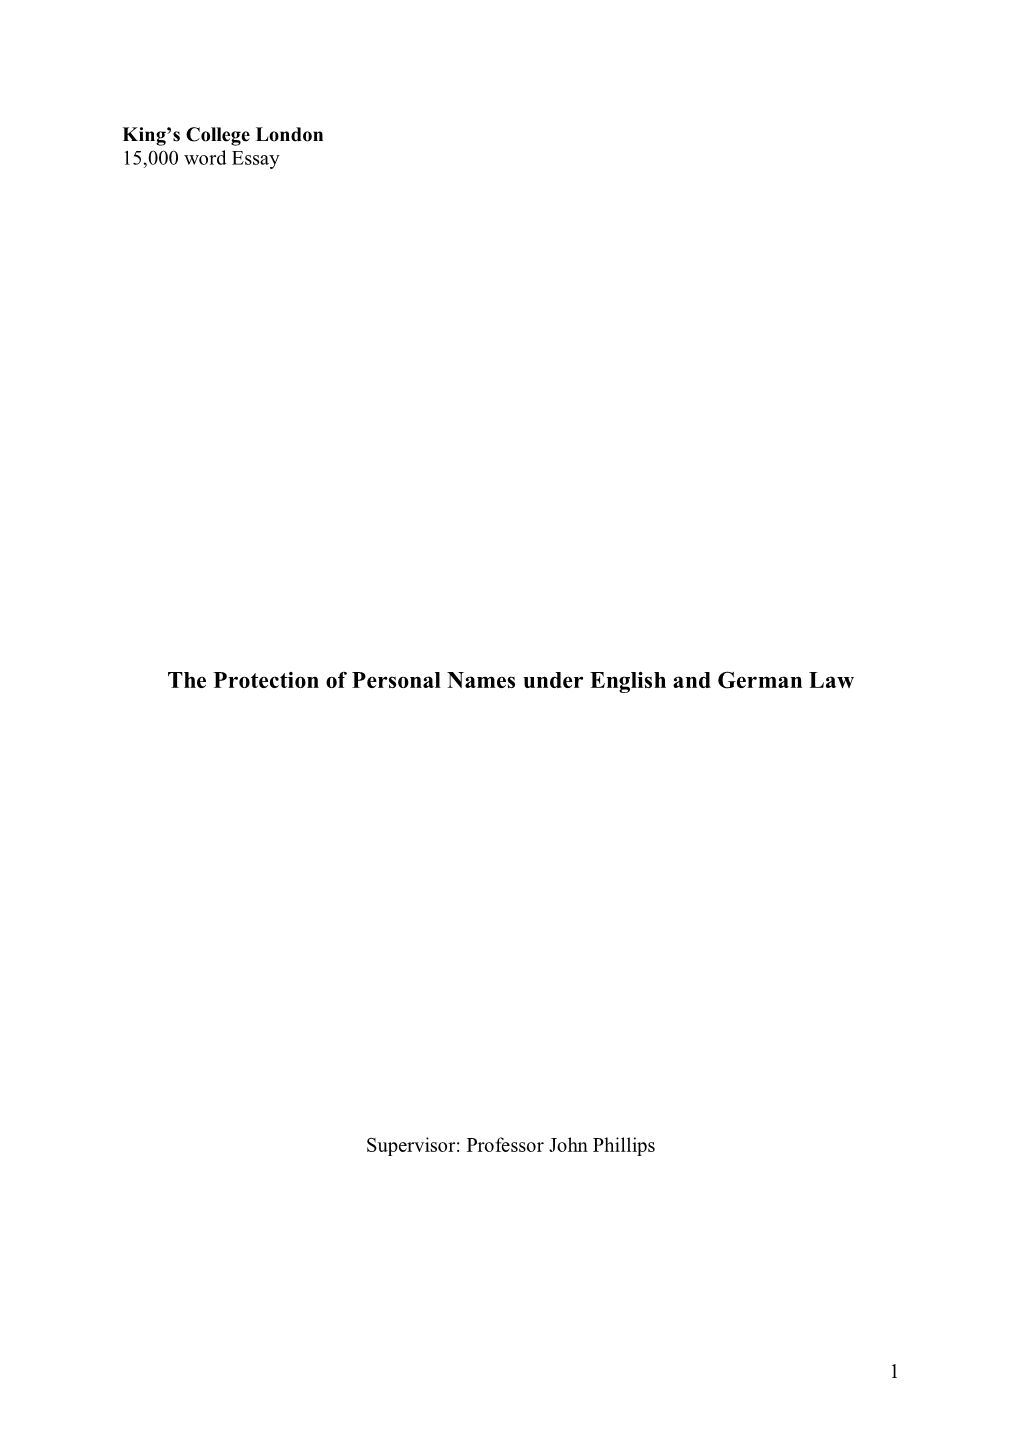 The Protection of Personal Names Under English and German Law